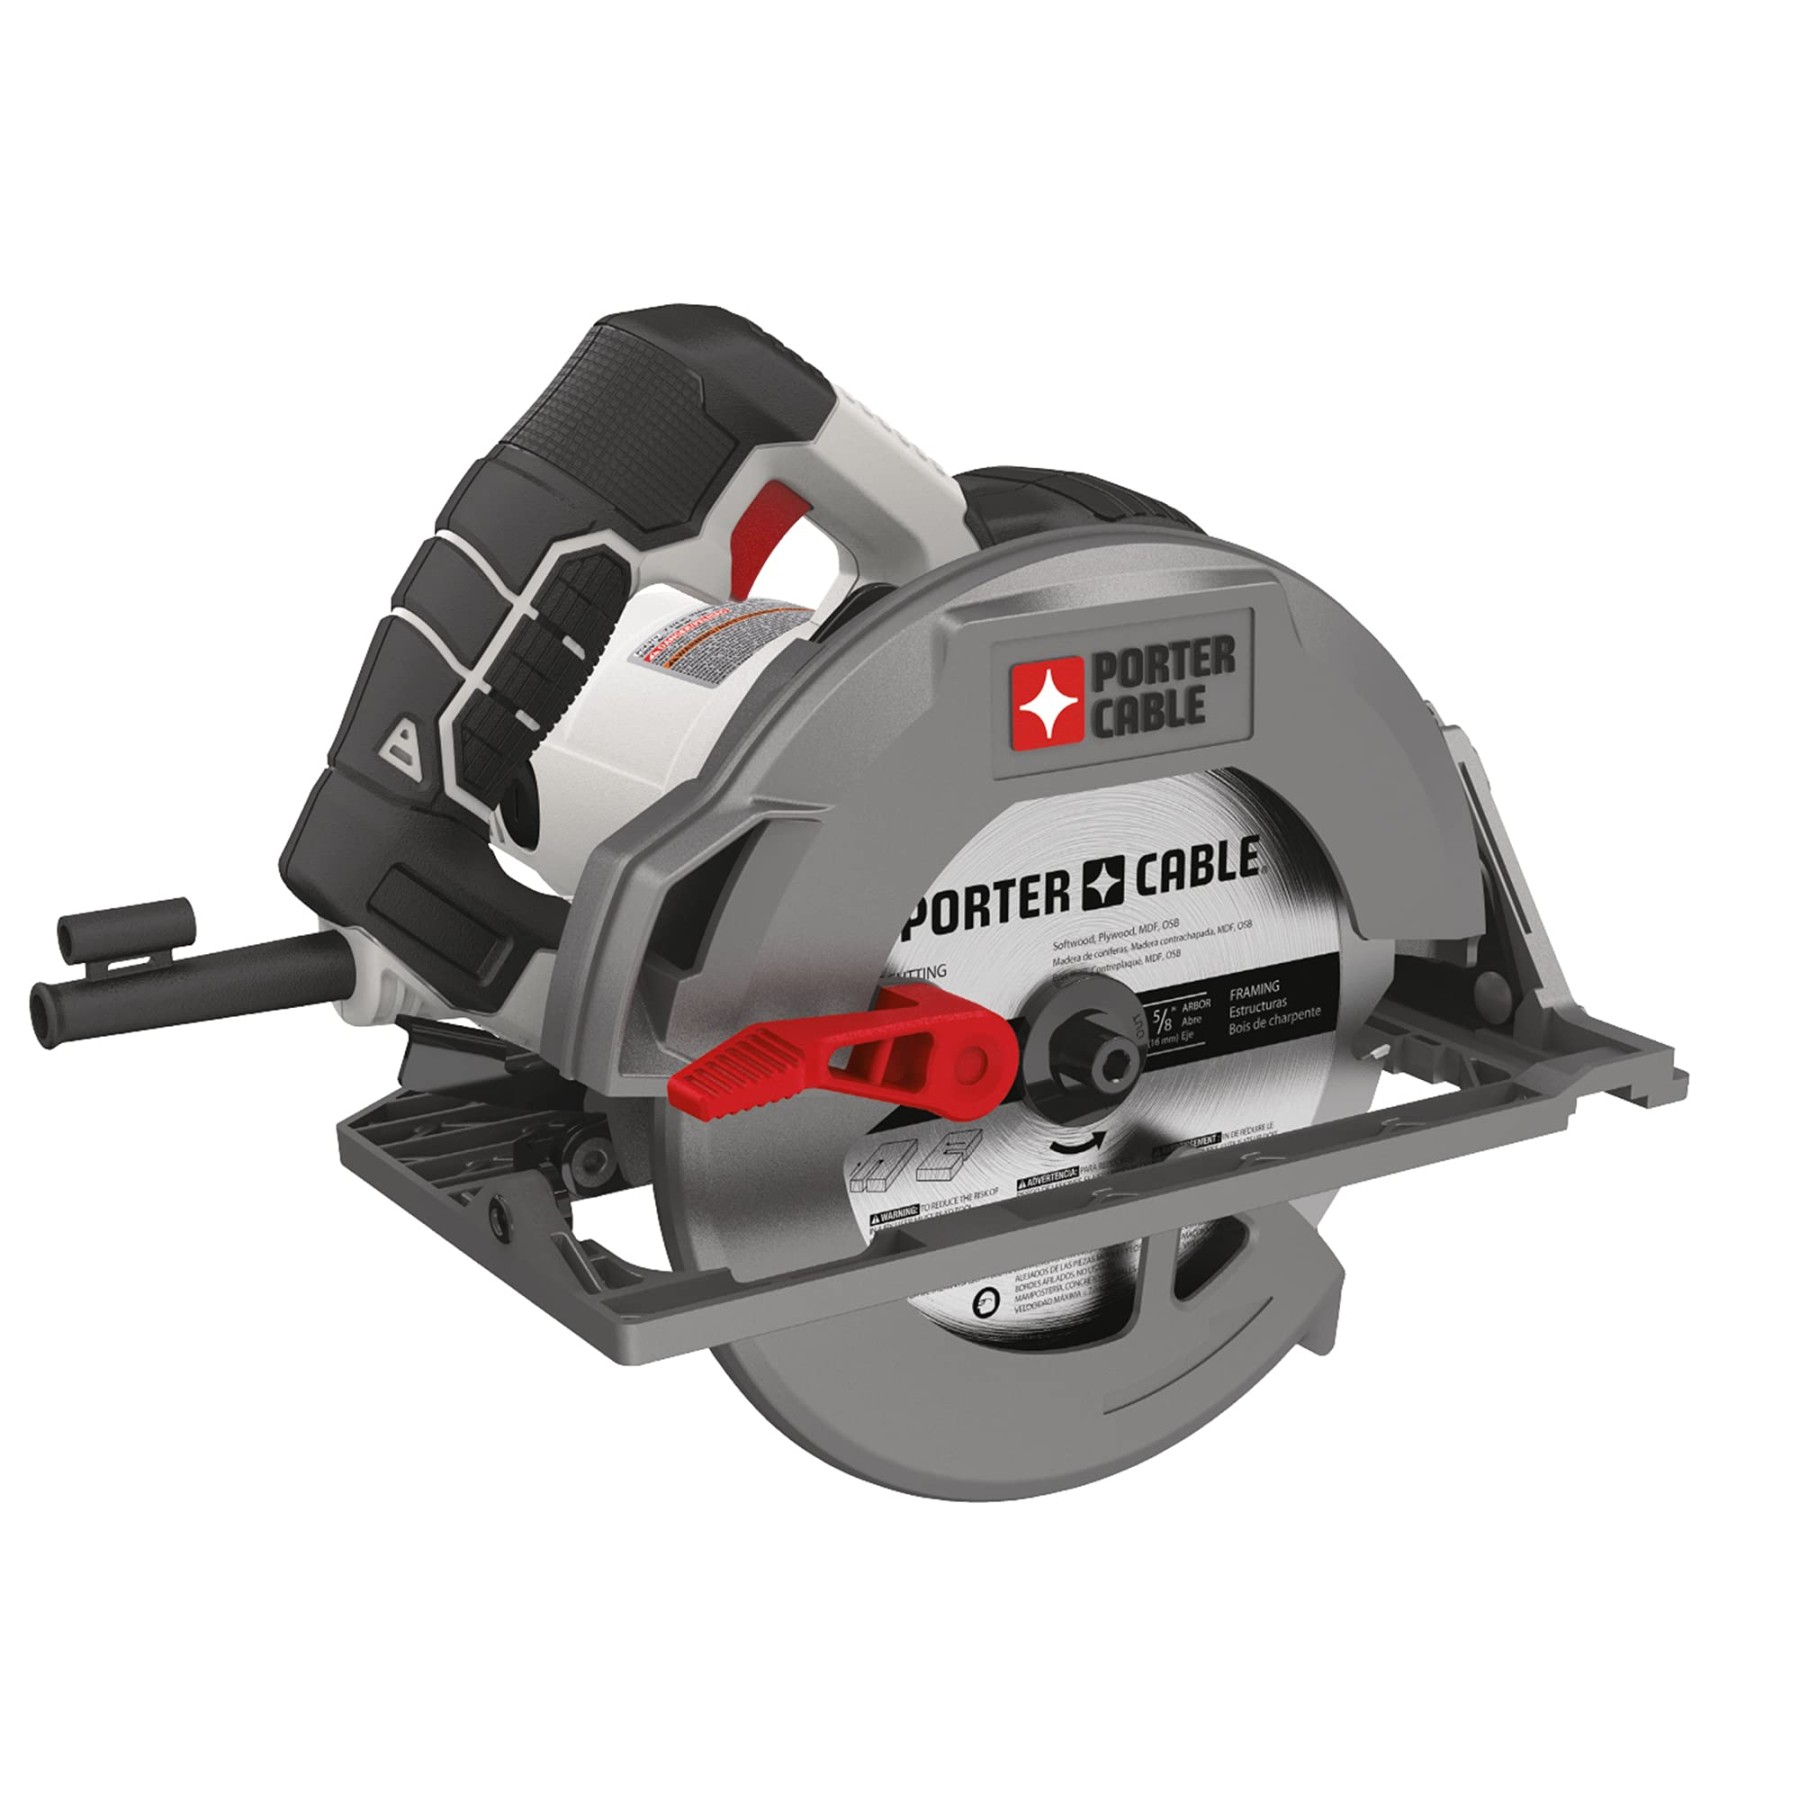 porter-cable-inch-circular-saw-5-amp-pce30-amazon-com Porter Cable Saw Review: Cutting Through The Options For DIYers And Pros picture